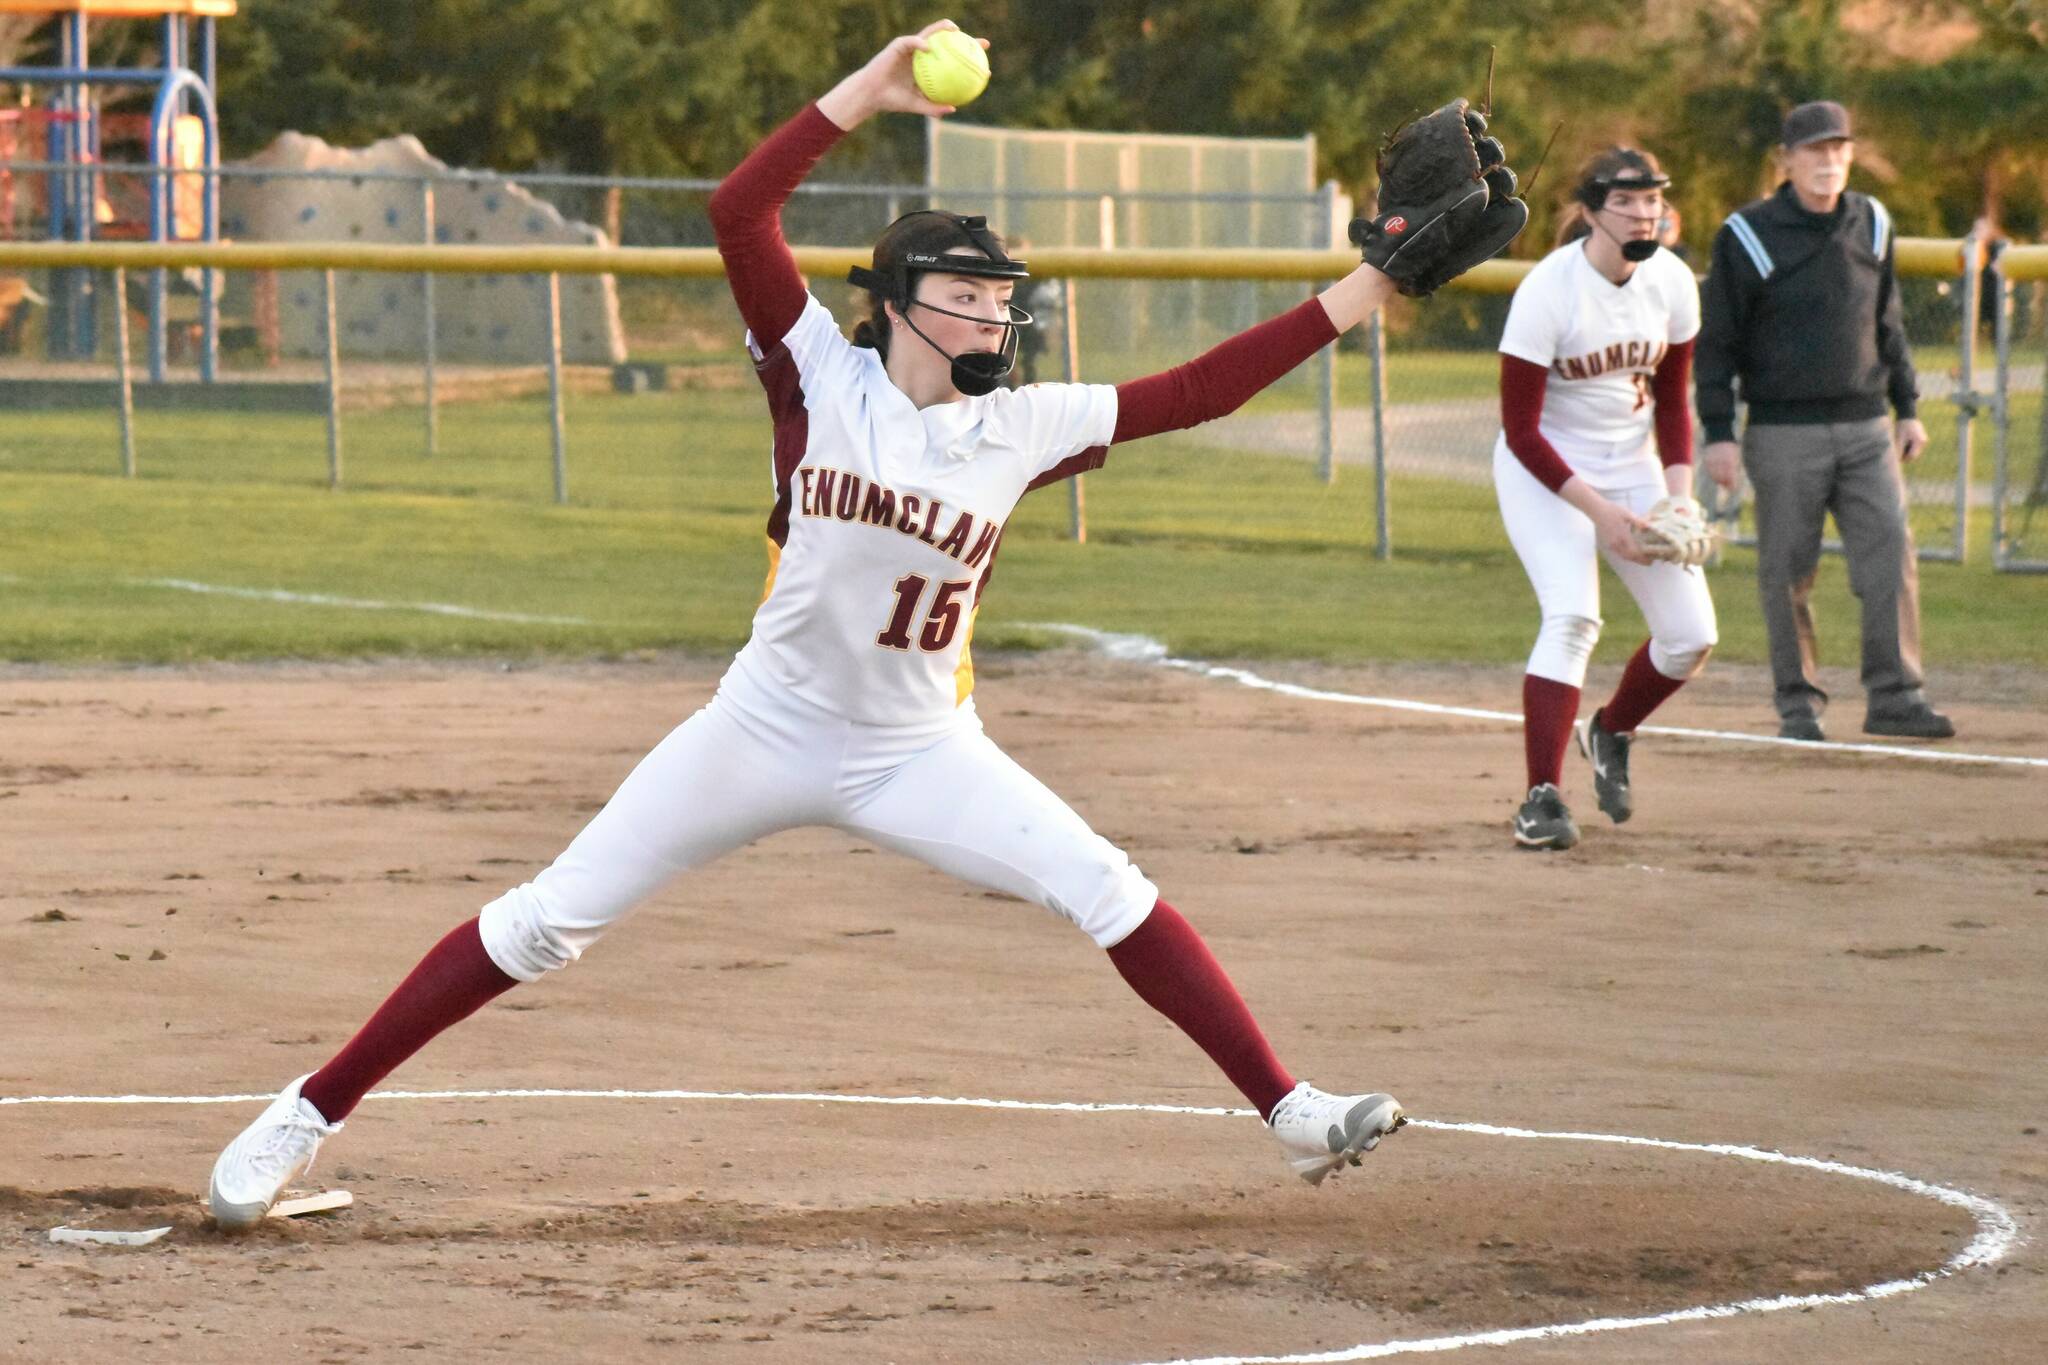 Enumclaw High senior Emilie Crimmins was once again sharp, pitching the Hornets past visiting Steilacoom the evening of March 21. The reigning SPSL 2A Pitcher of the Year struck out seven during three innings of work, giving the Hornets the early momentum on the way to an 18-4 victory. She was productive at the plate as well, collecting two hits, scoring three times and driving in a run. Photo by Kevin Hanson